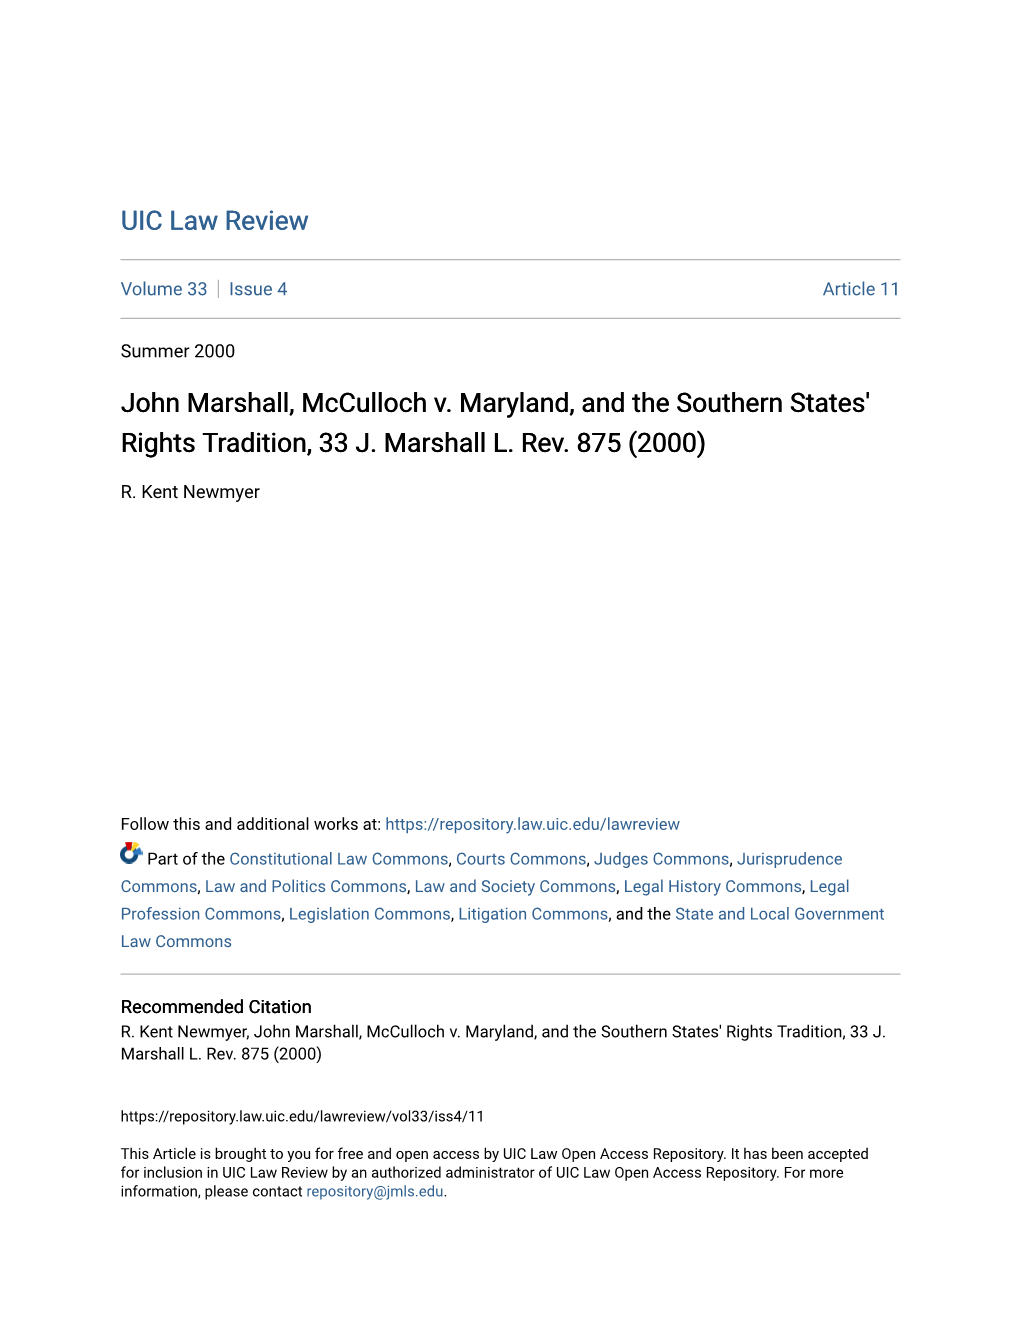 John Marshall, Mcculloch V. Maryland, and the Southern States' Rights Tradition, 33 J